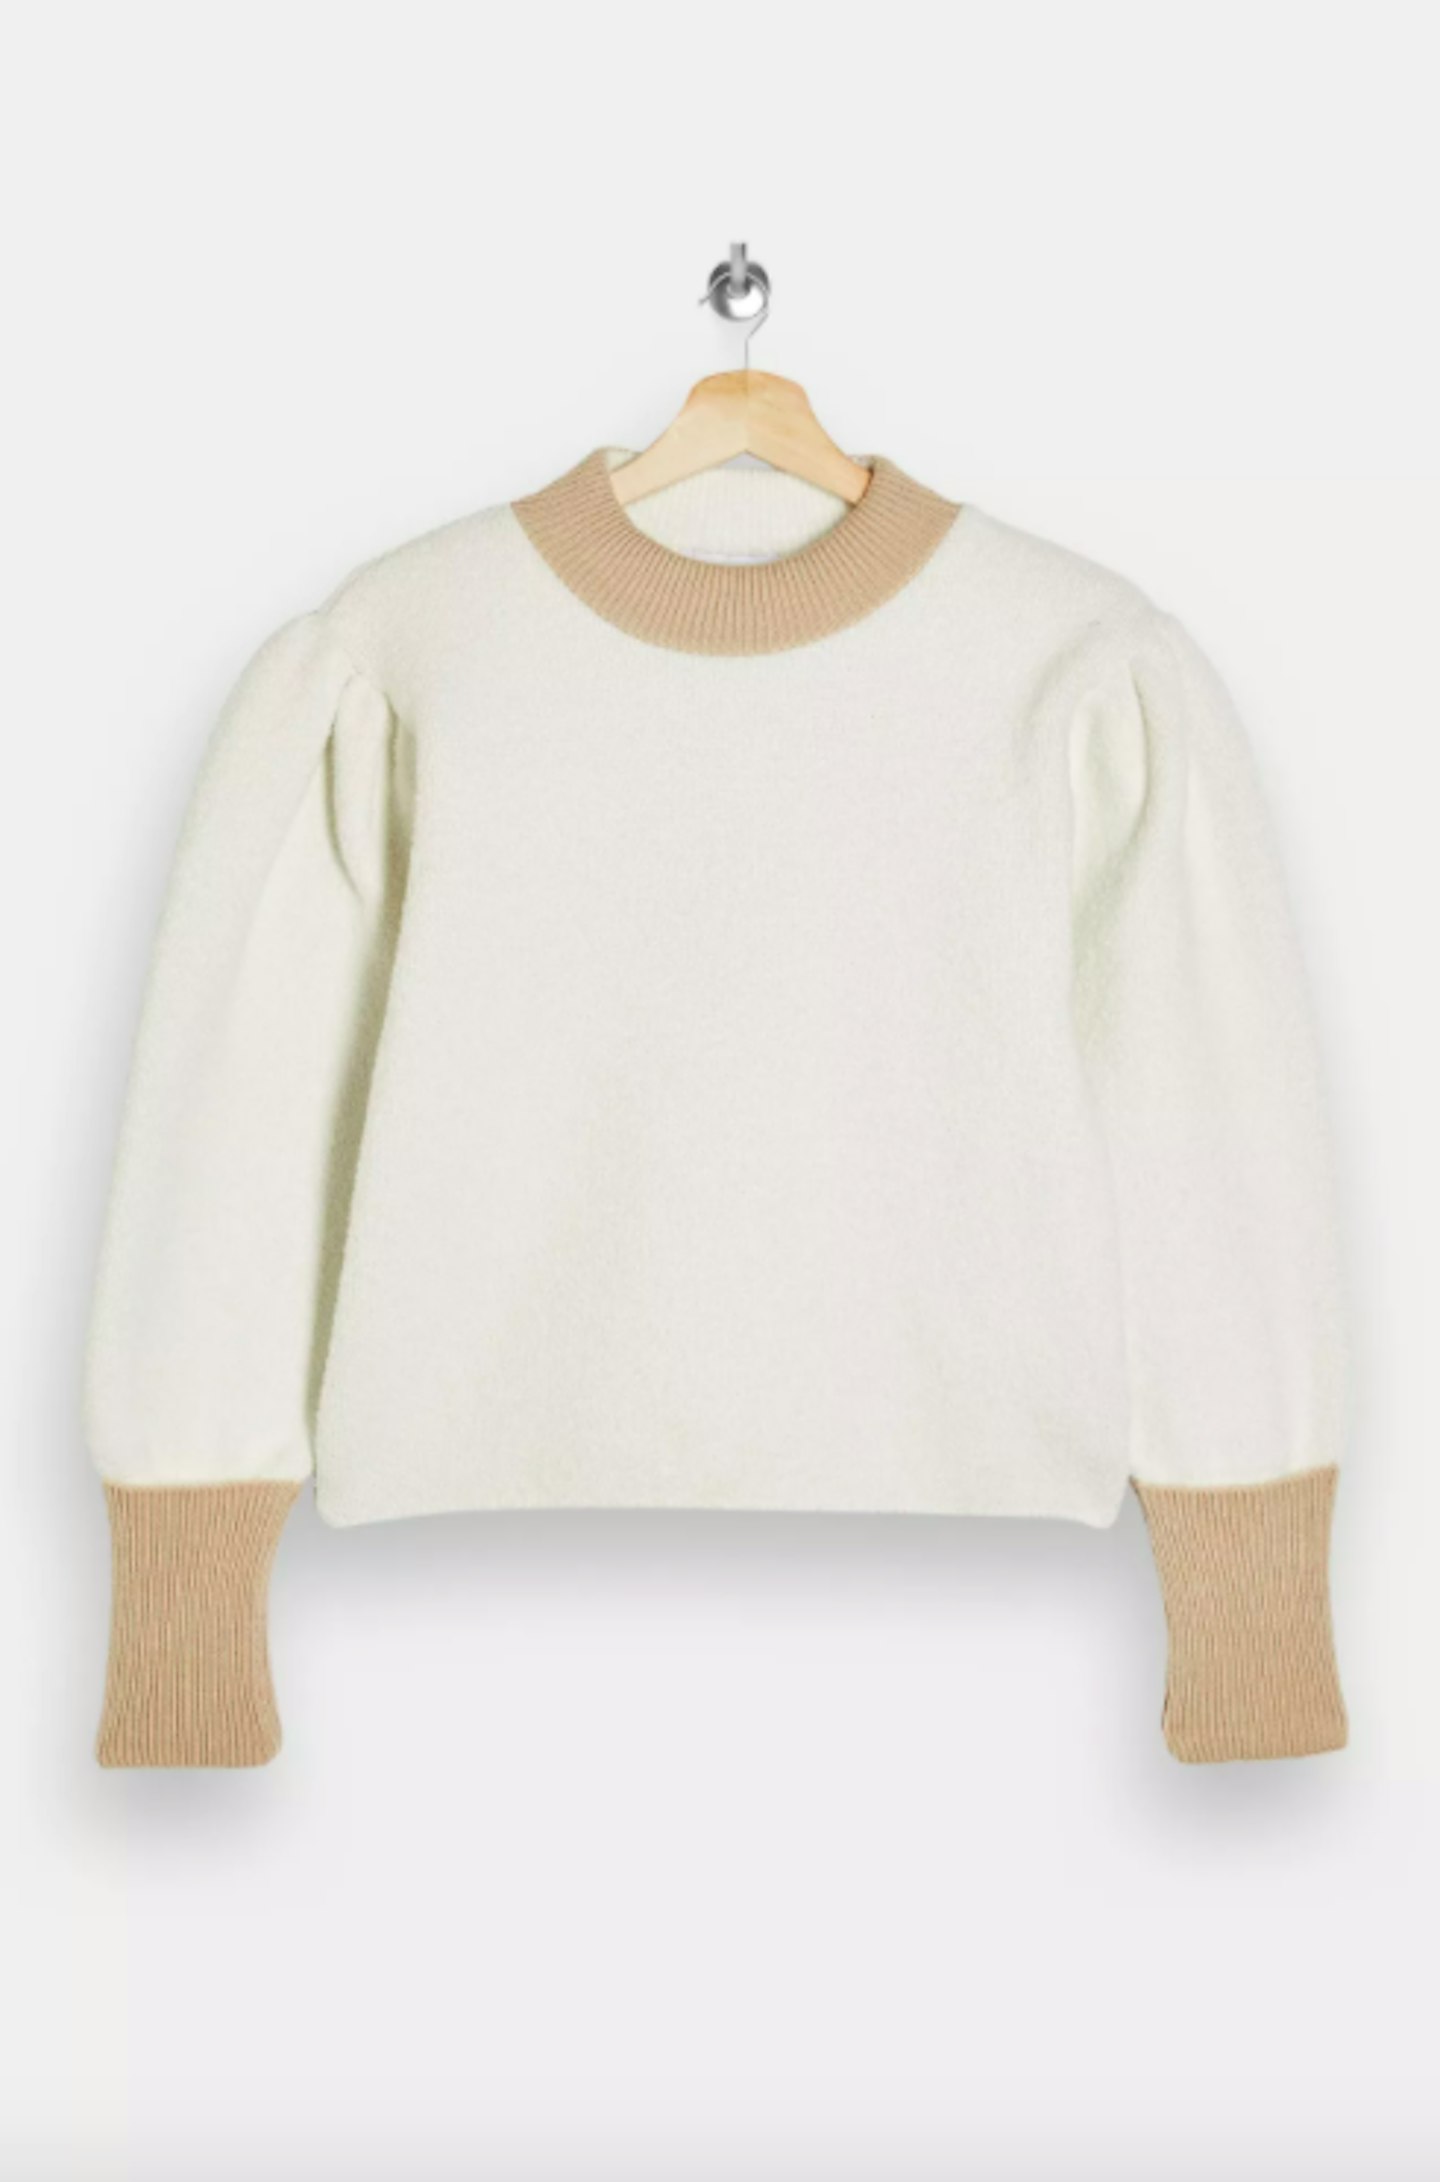 Topshop, Idol Boucle Contrast Turn Up Knitted Jumper, £39.99